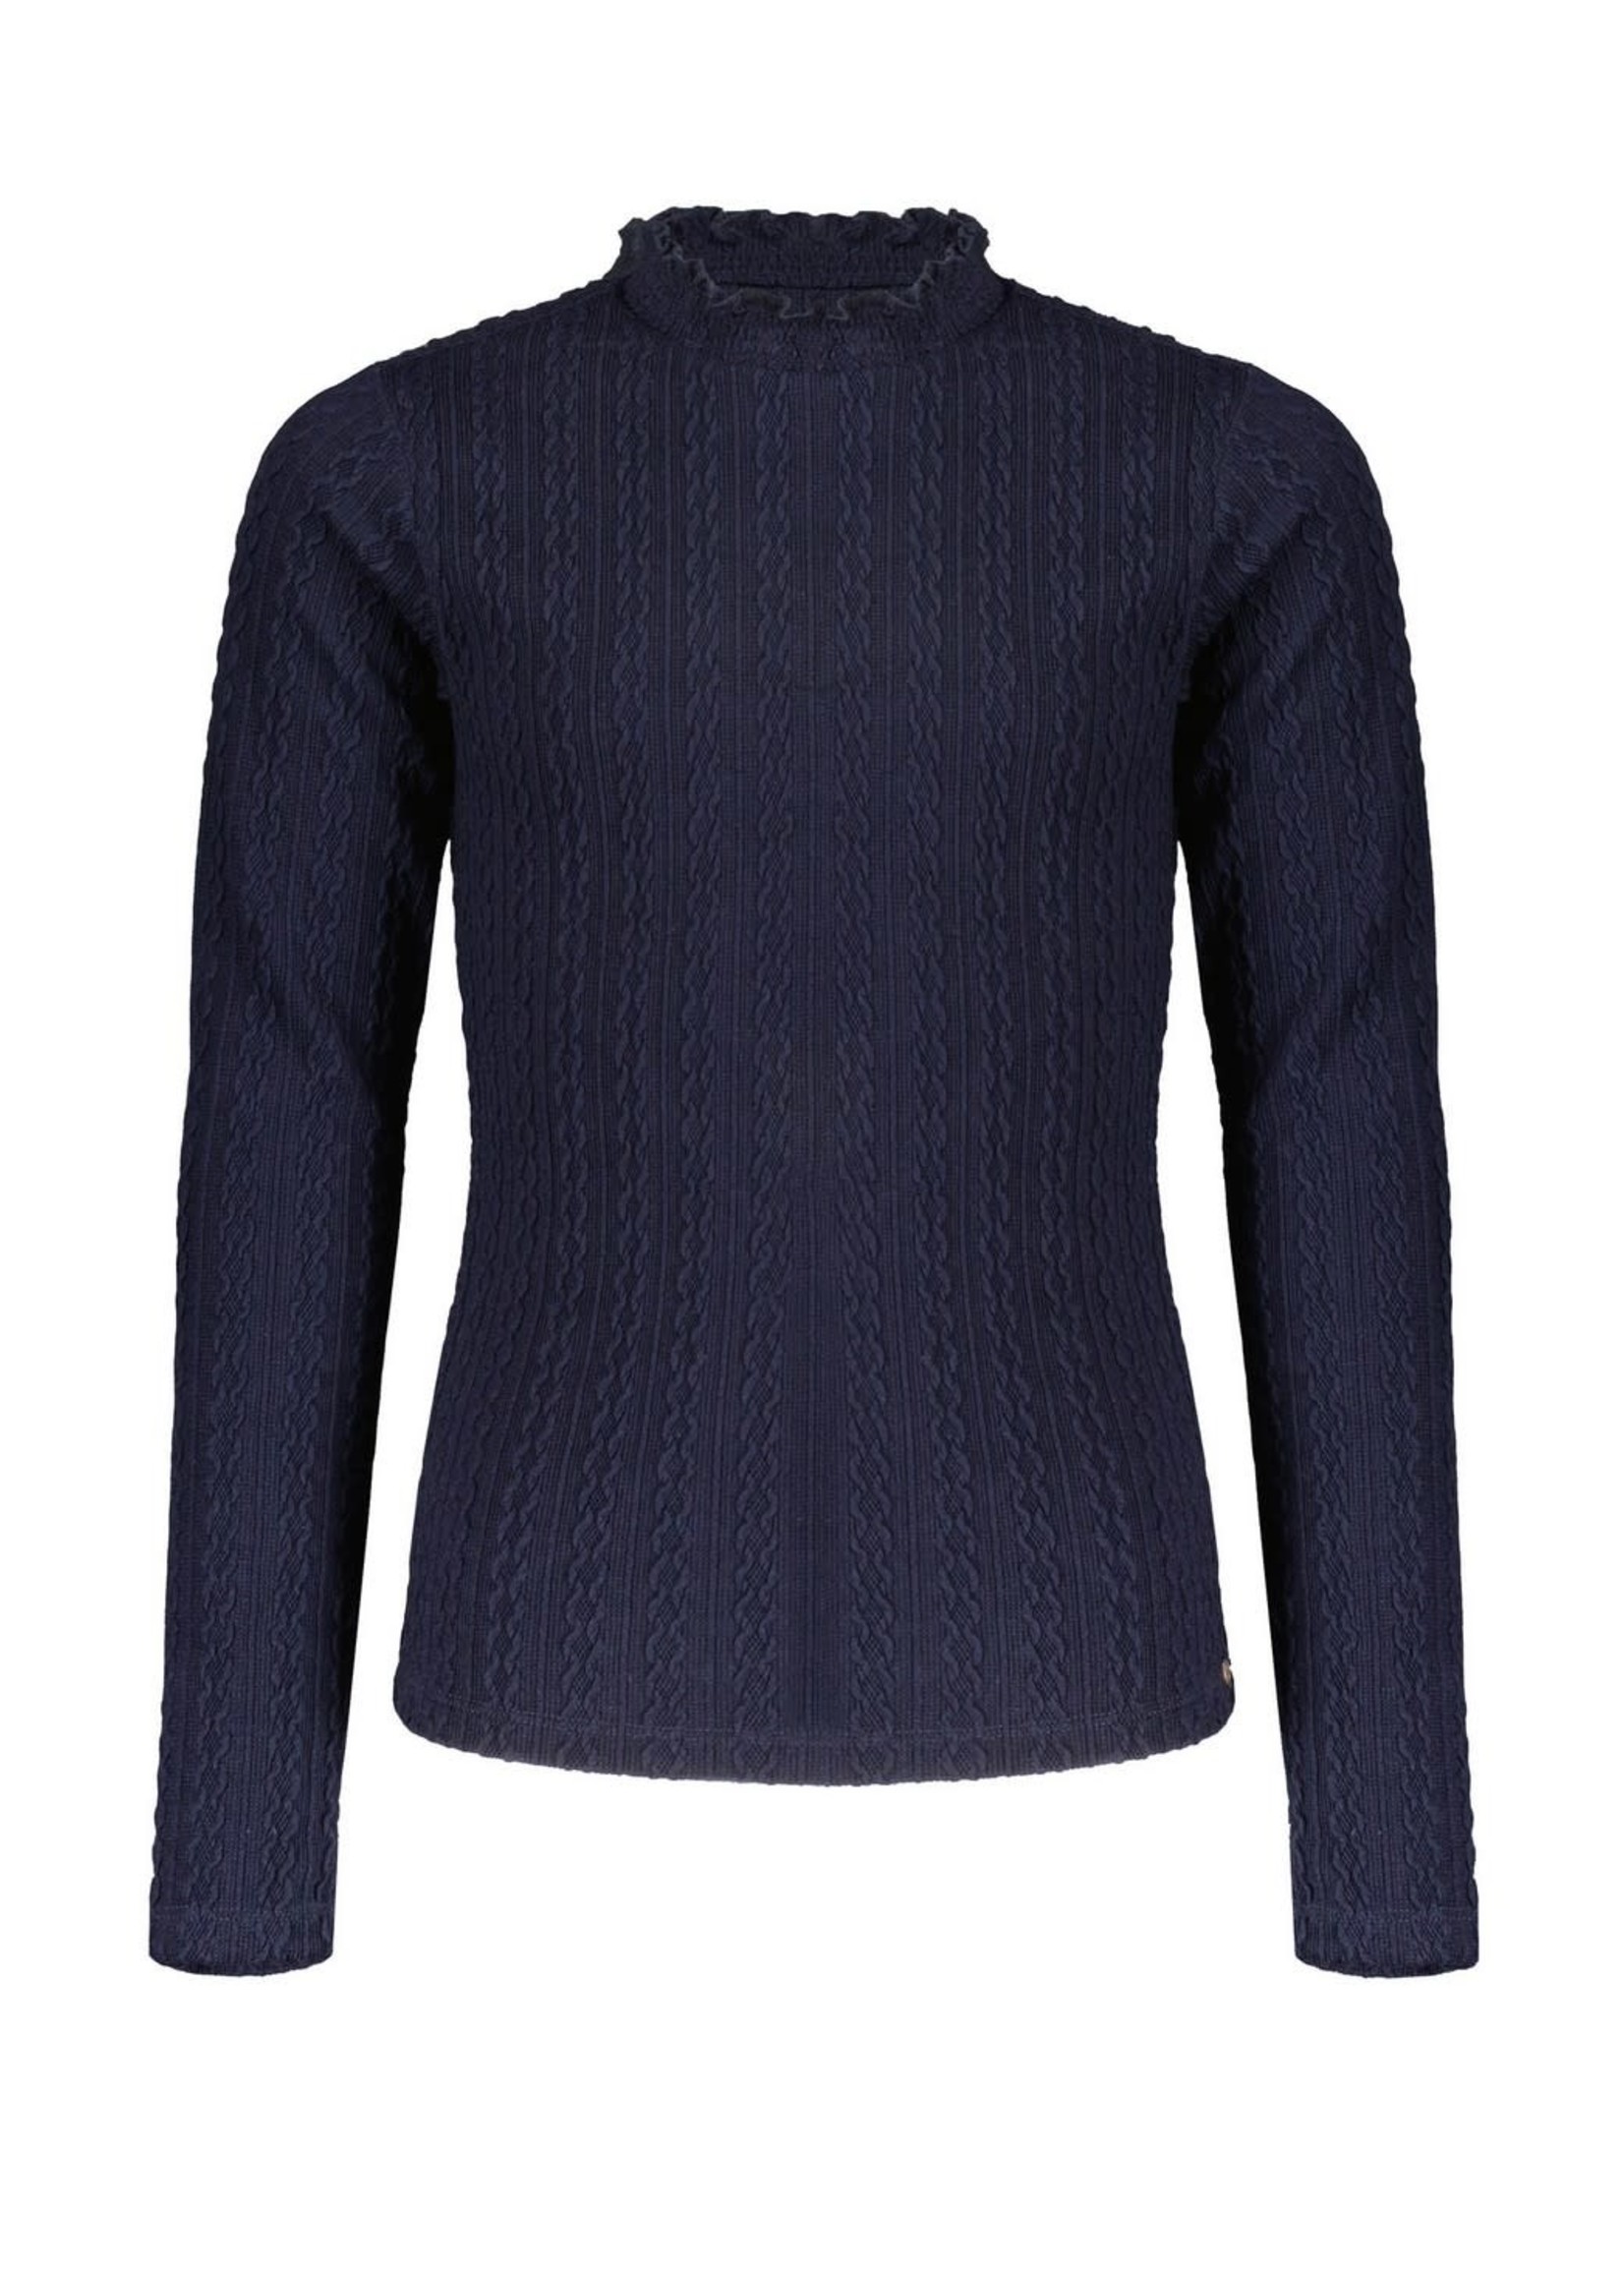 Nobell Nobell Koba cable knit turtle neck l/sl top Q208-3400 Grey Navy